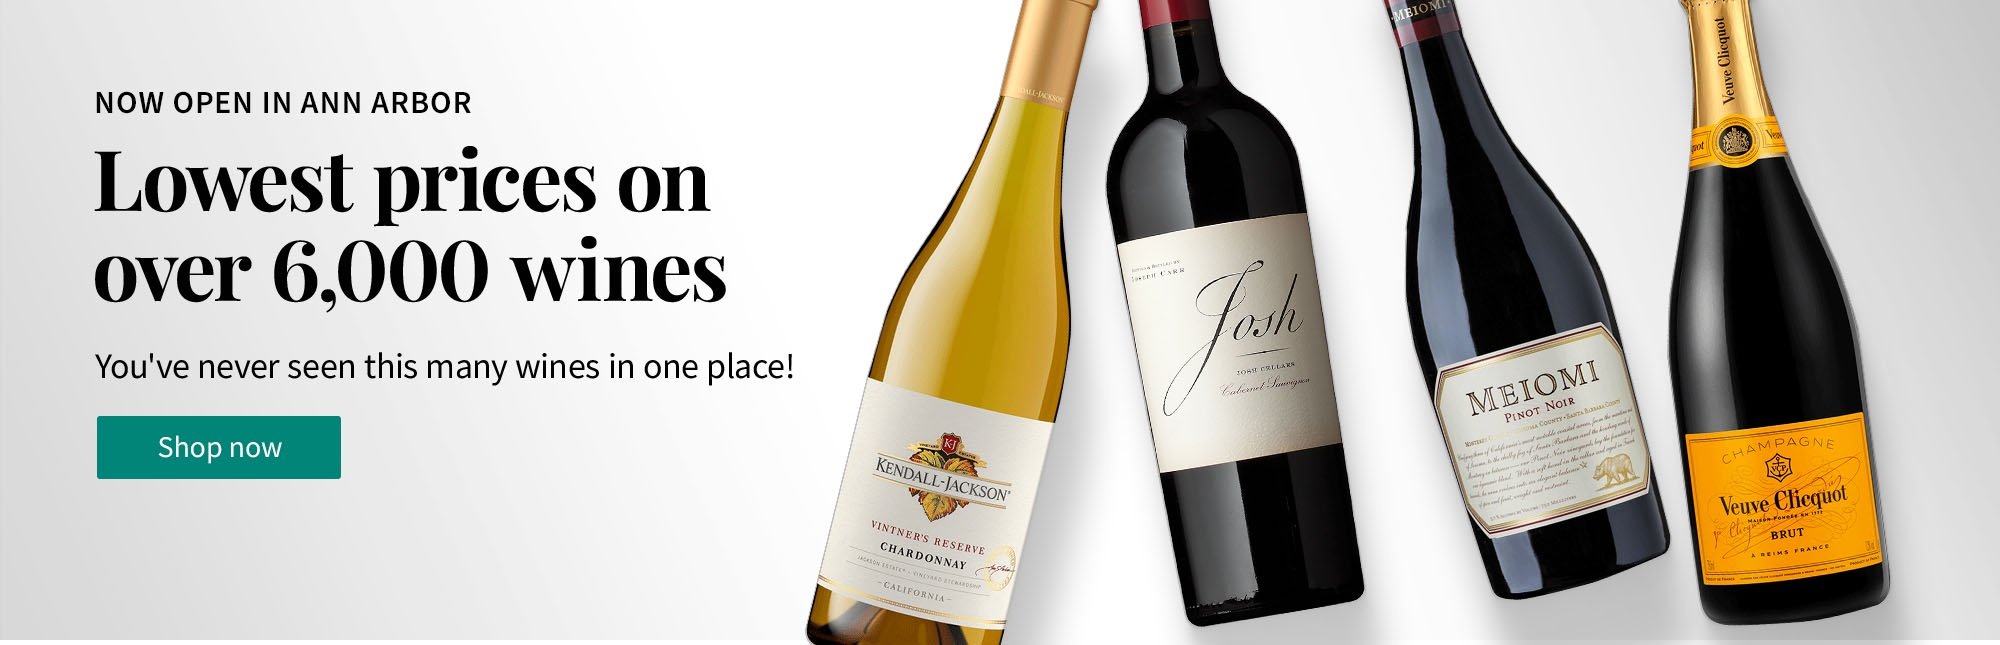 Now open in Ann Arbor. Lowest prices on over 6,000 wines. You've never seen this many wines in one place! Shop now.